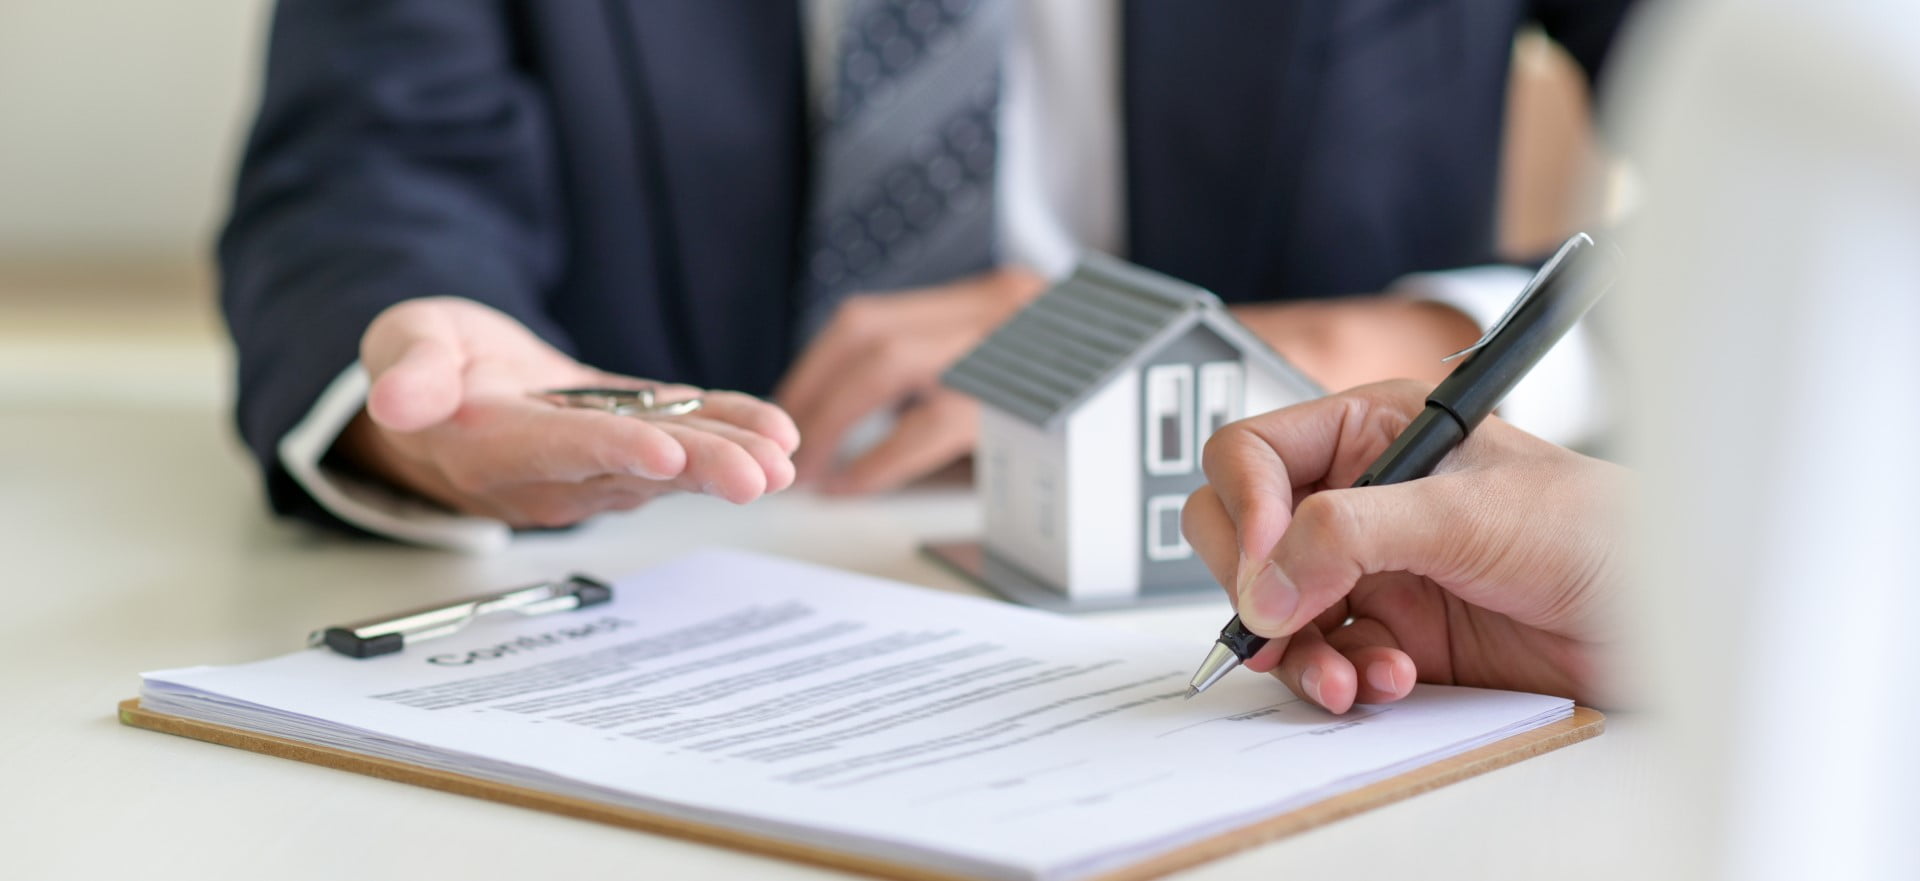 Bank vs Mortgage Broker - Where to Get a Mortgage From Blog Featured Image - Man Signing a Contract on a Home Loan for a Home Purchase